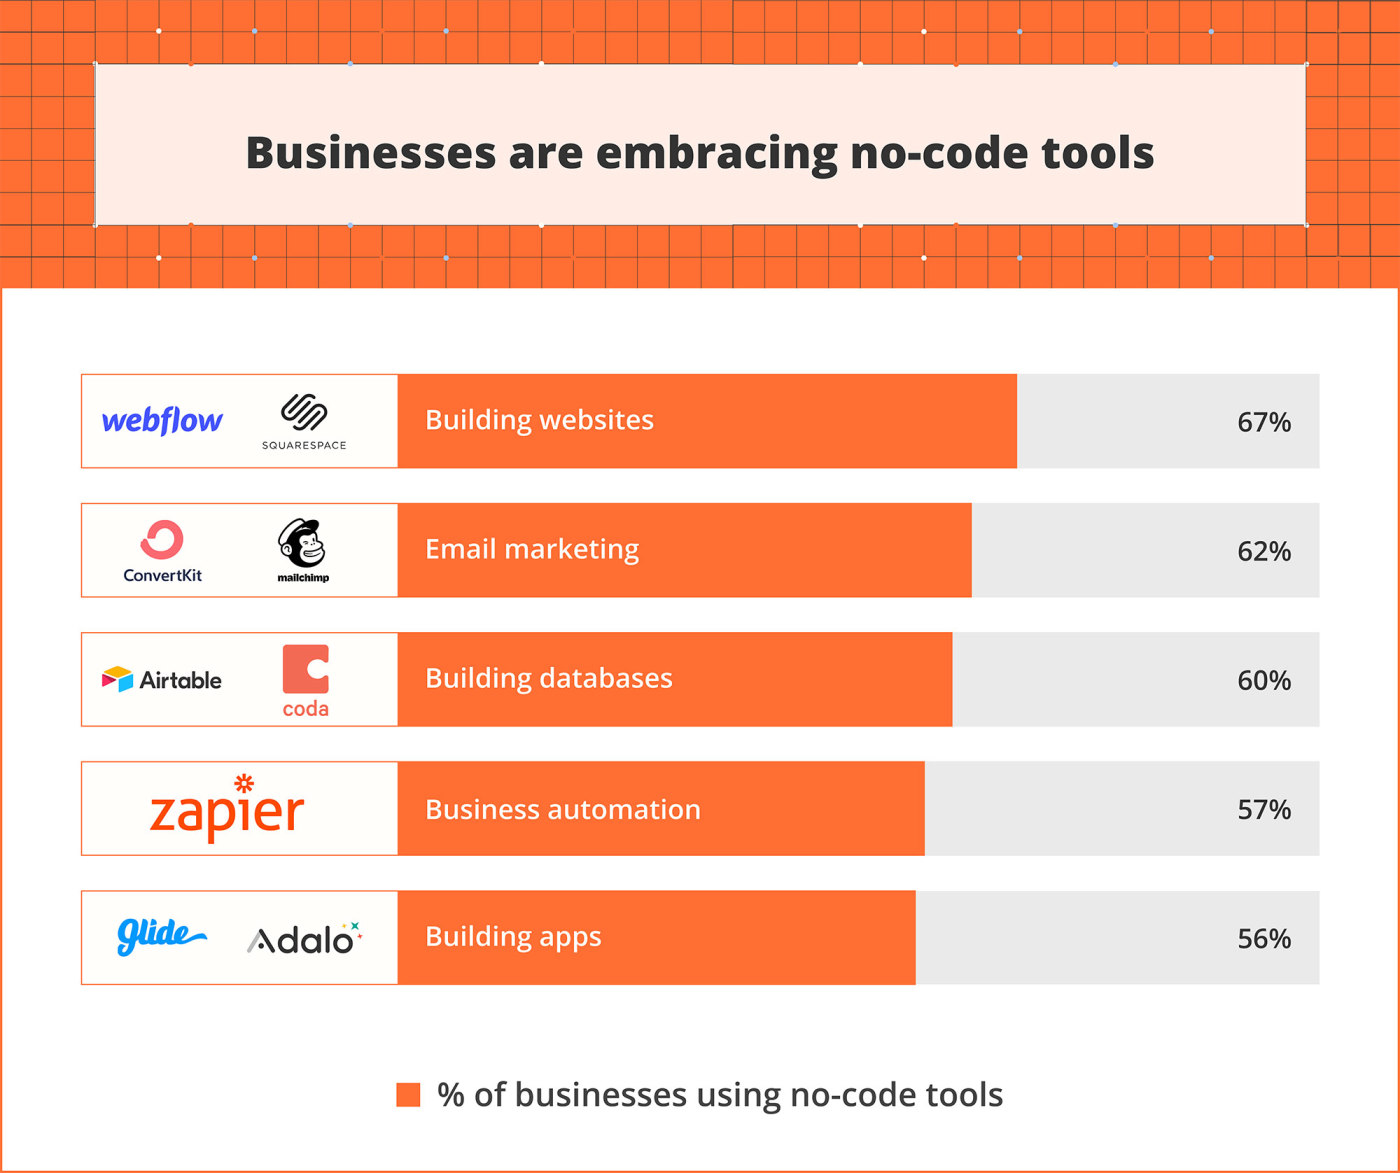 A bar graph showing the types of no-code tools businesses are embracing (building websites, email marketing, building databases, business automation, building apps)